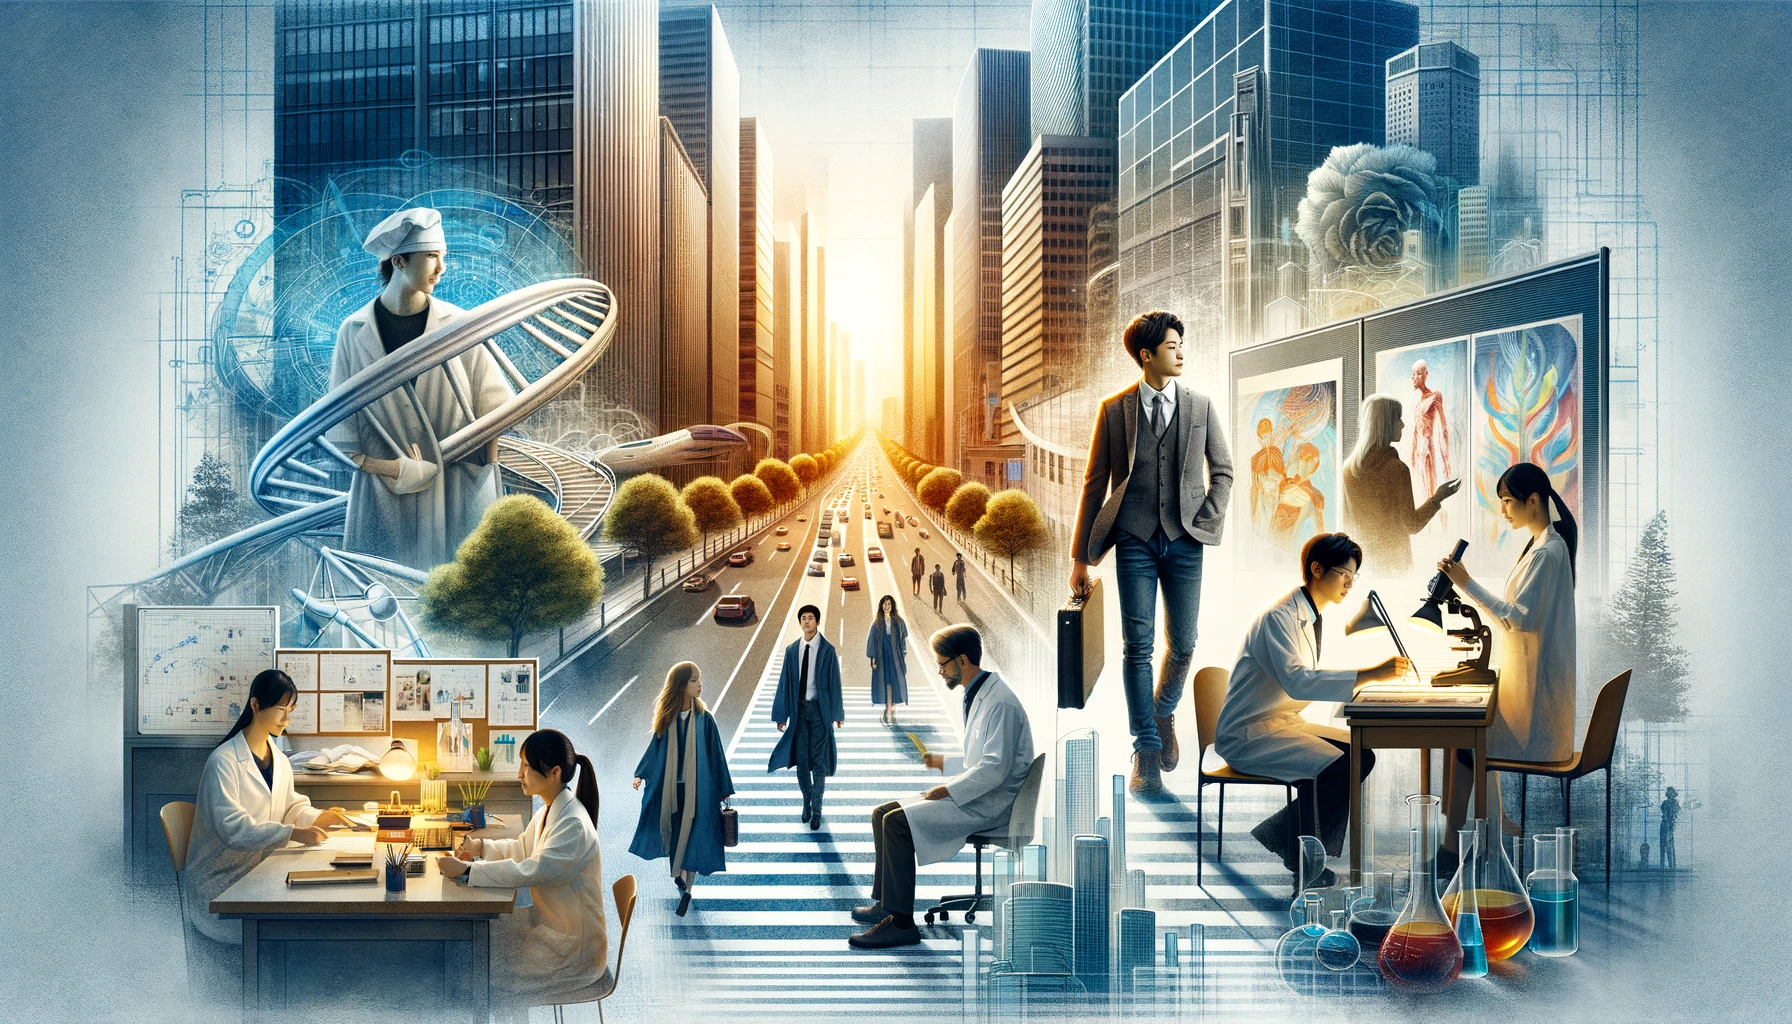 A conceptual image showcasing the diverse future pathways of graduates from Meiji High School in Japan. The scene includes a collage of students in various settings: one dressed in a business suit walking in a bustling cityscape, another in a lab coat working in a modern laboratory, and another in artist's attire in a bright, creative studio. Each segment represents different career paths such as business, science, and arts. The background features elements of the school's architecture, subtly blending into each professional environment, symbolizing the school's role in their successful futures.